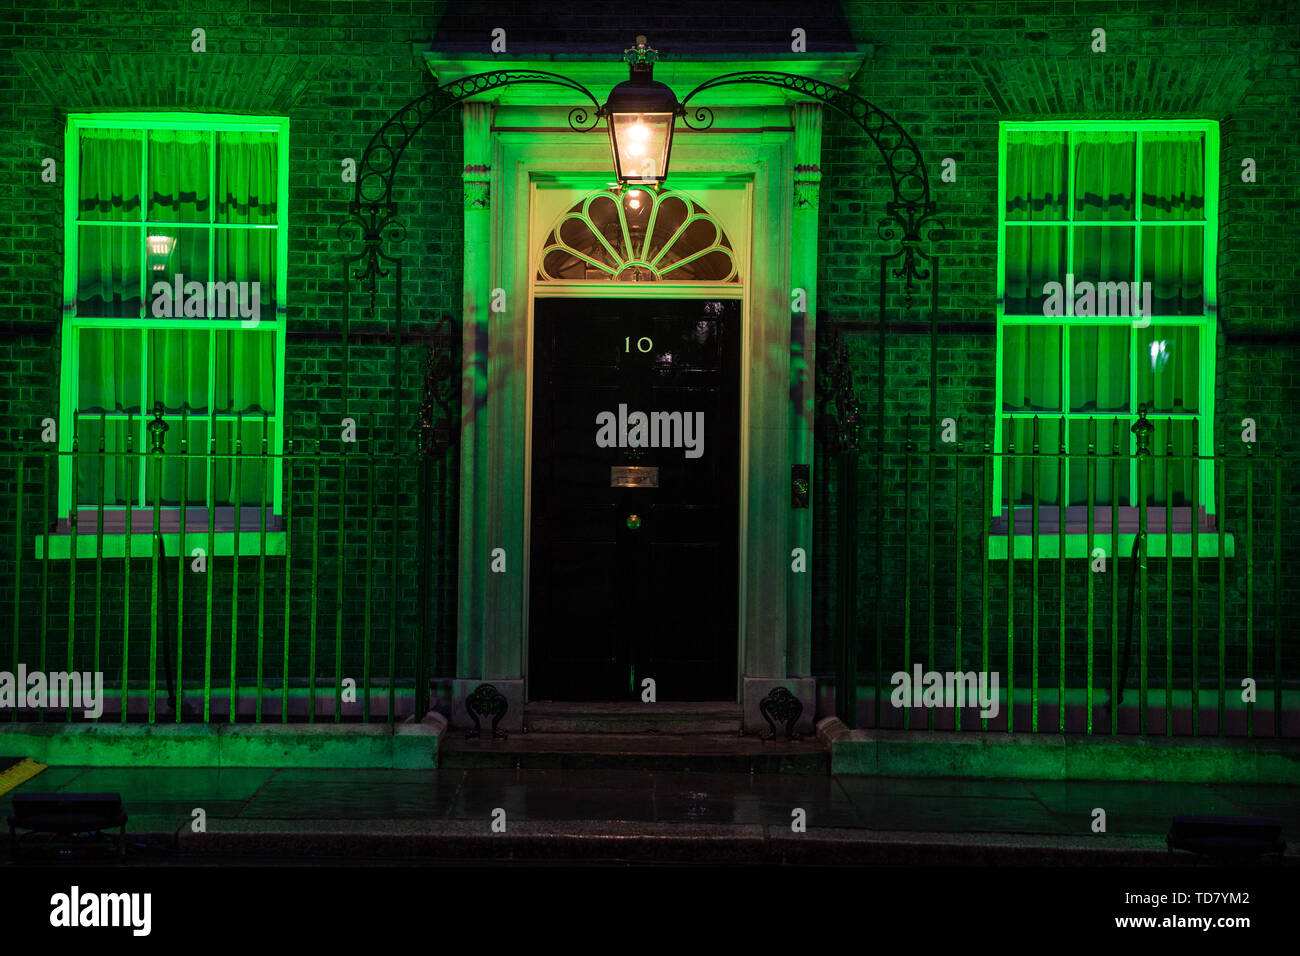 London, UK. 13 June, 2019. 10 Downing Street is lit in green to mark the second anniversary of the Grenfell Tower fire on 14th June 2017 in which 72 people died and over 70 were injured. Credit: Mark Kerrison/Alamy Live News Stock Photo